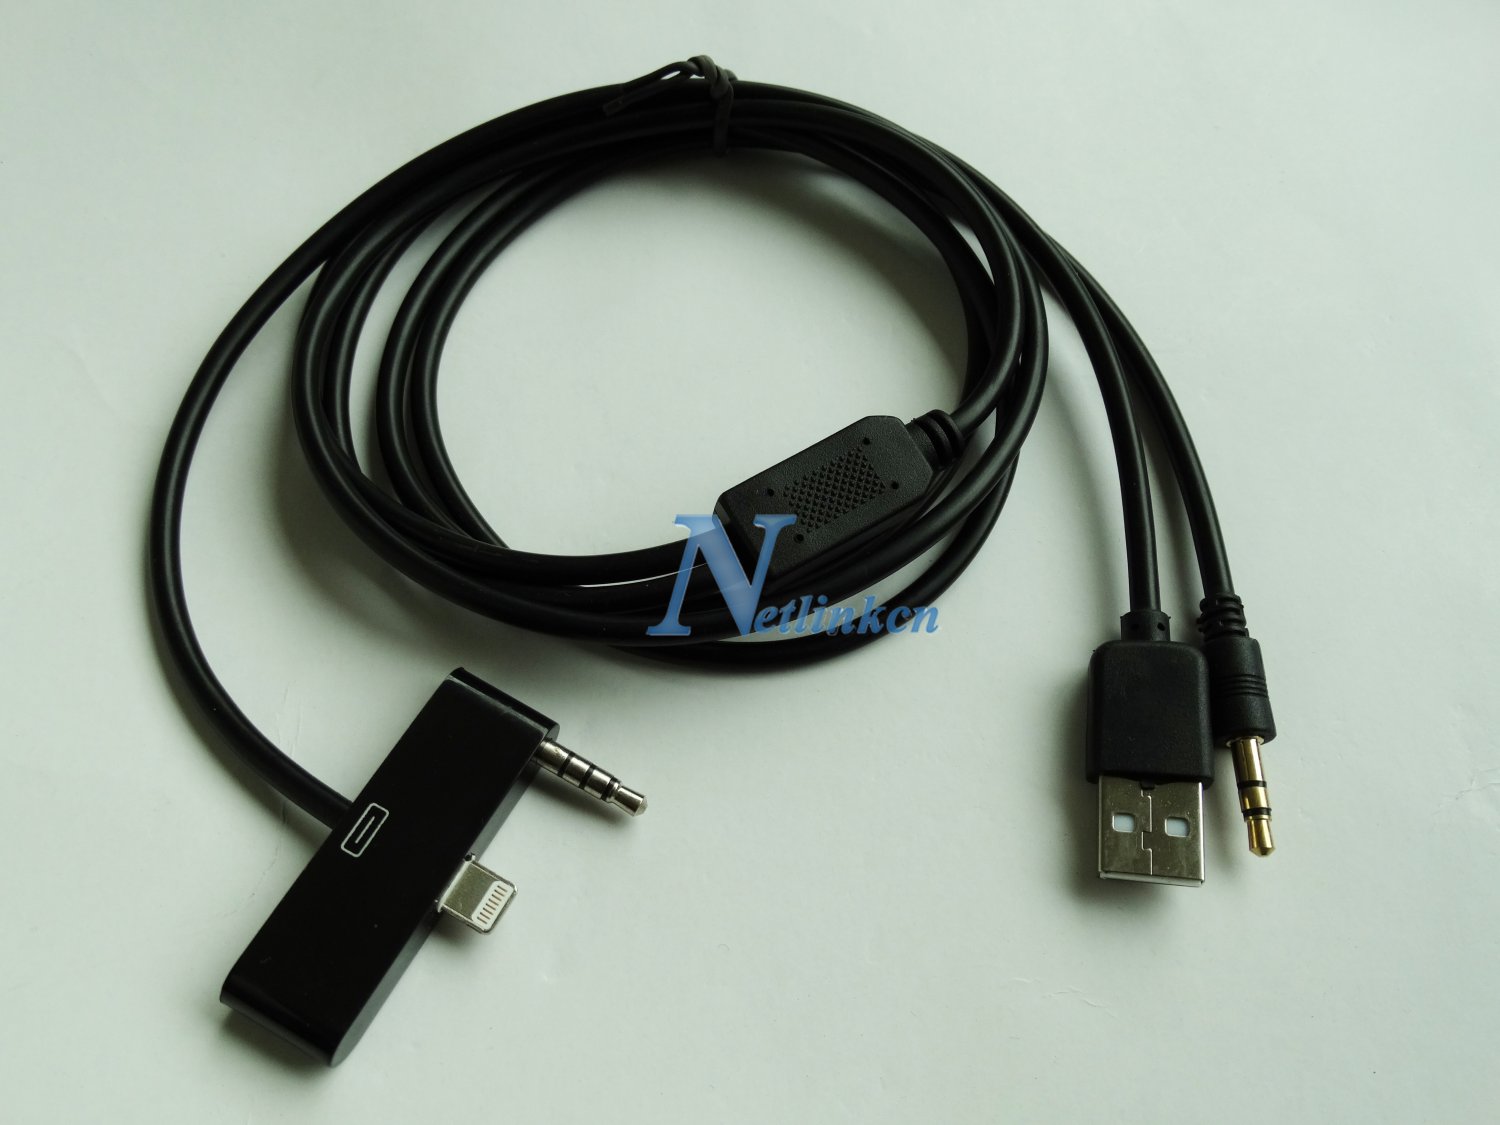 CADILLAC CTS AUX CABLE 8PIN iPHONE 5 5s 5c iPOD TOUCH 5th GEN 25908035 USB 3.5MM